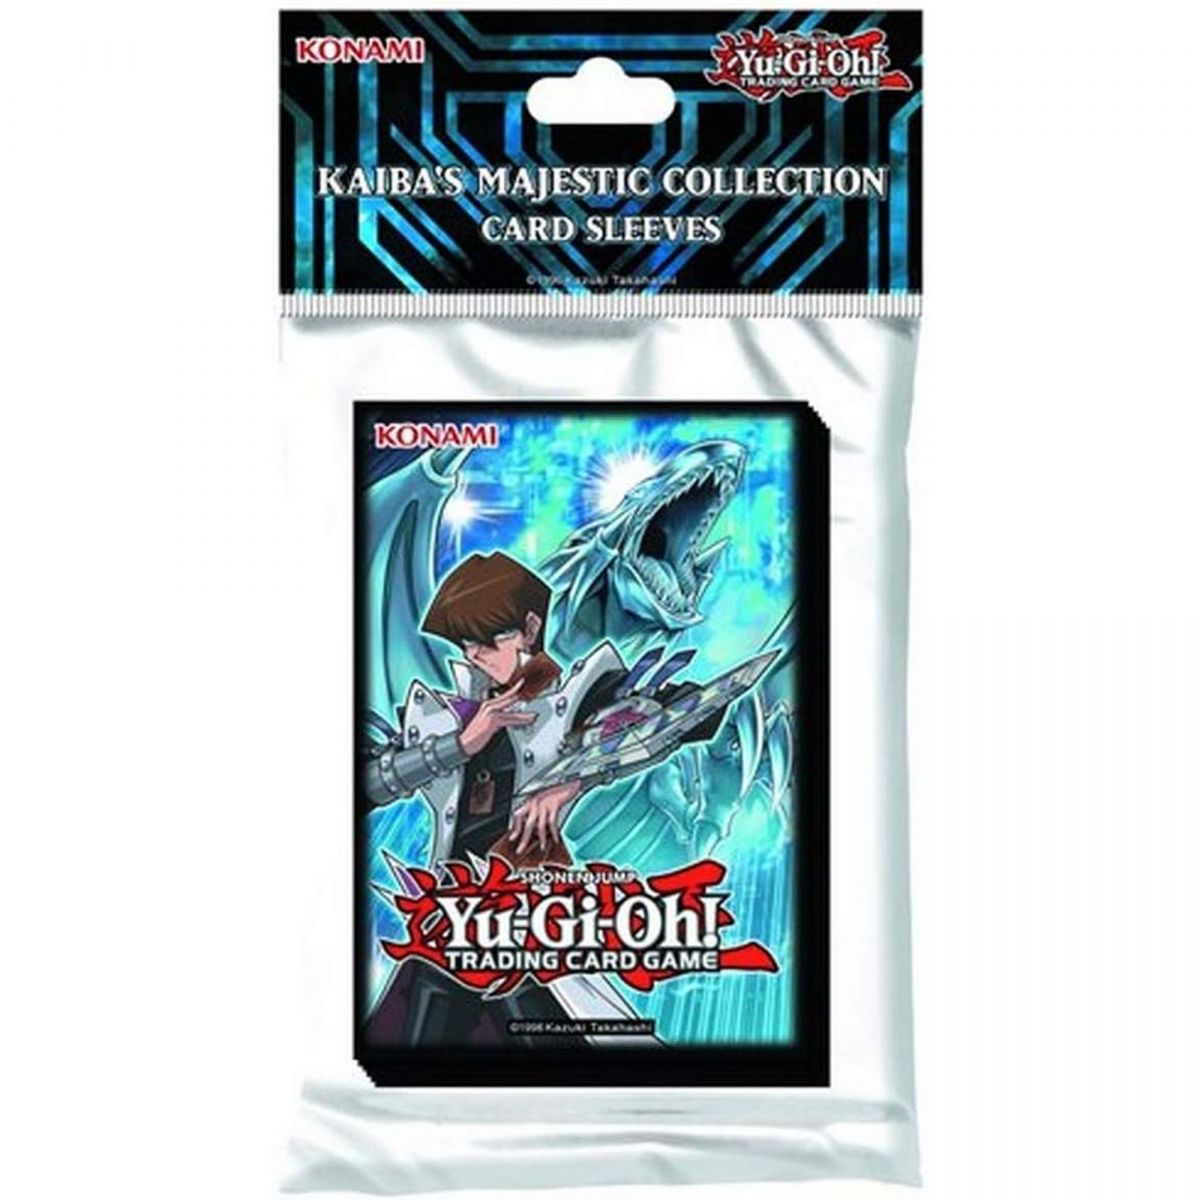 Yu Gi Oh! Kaiba's Majestic Collection Card Sleeves (50ct)